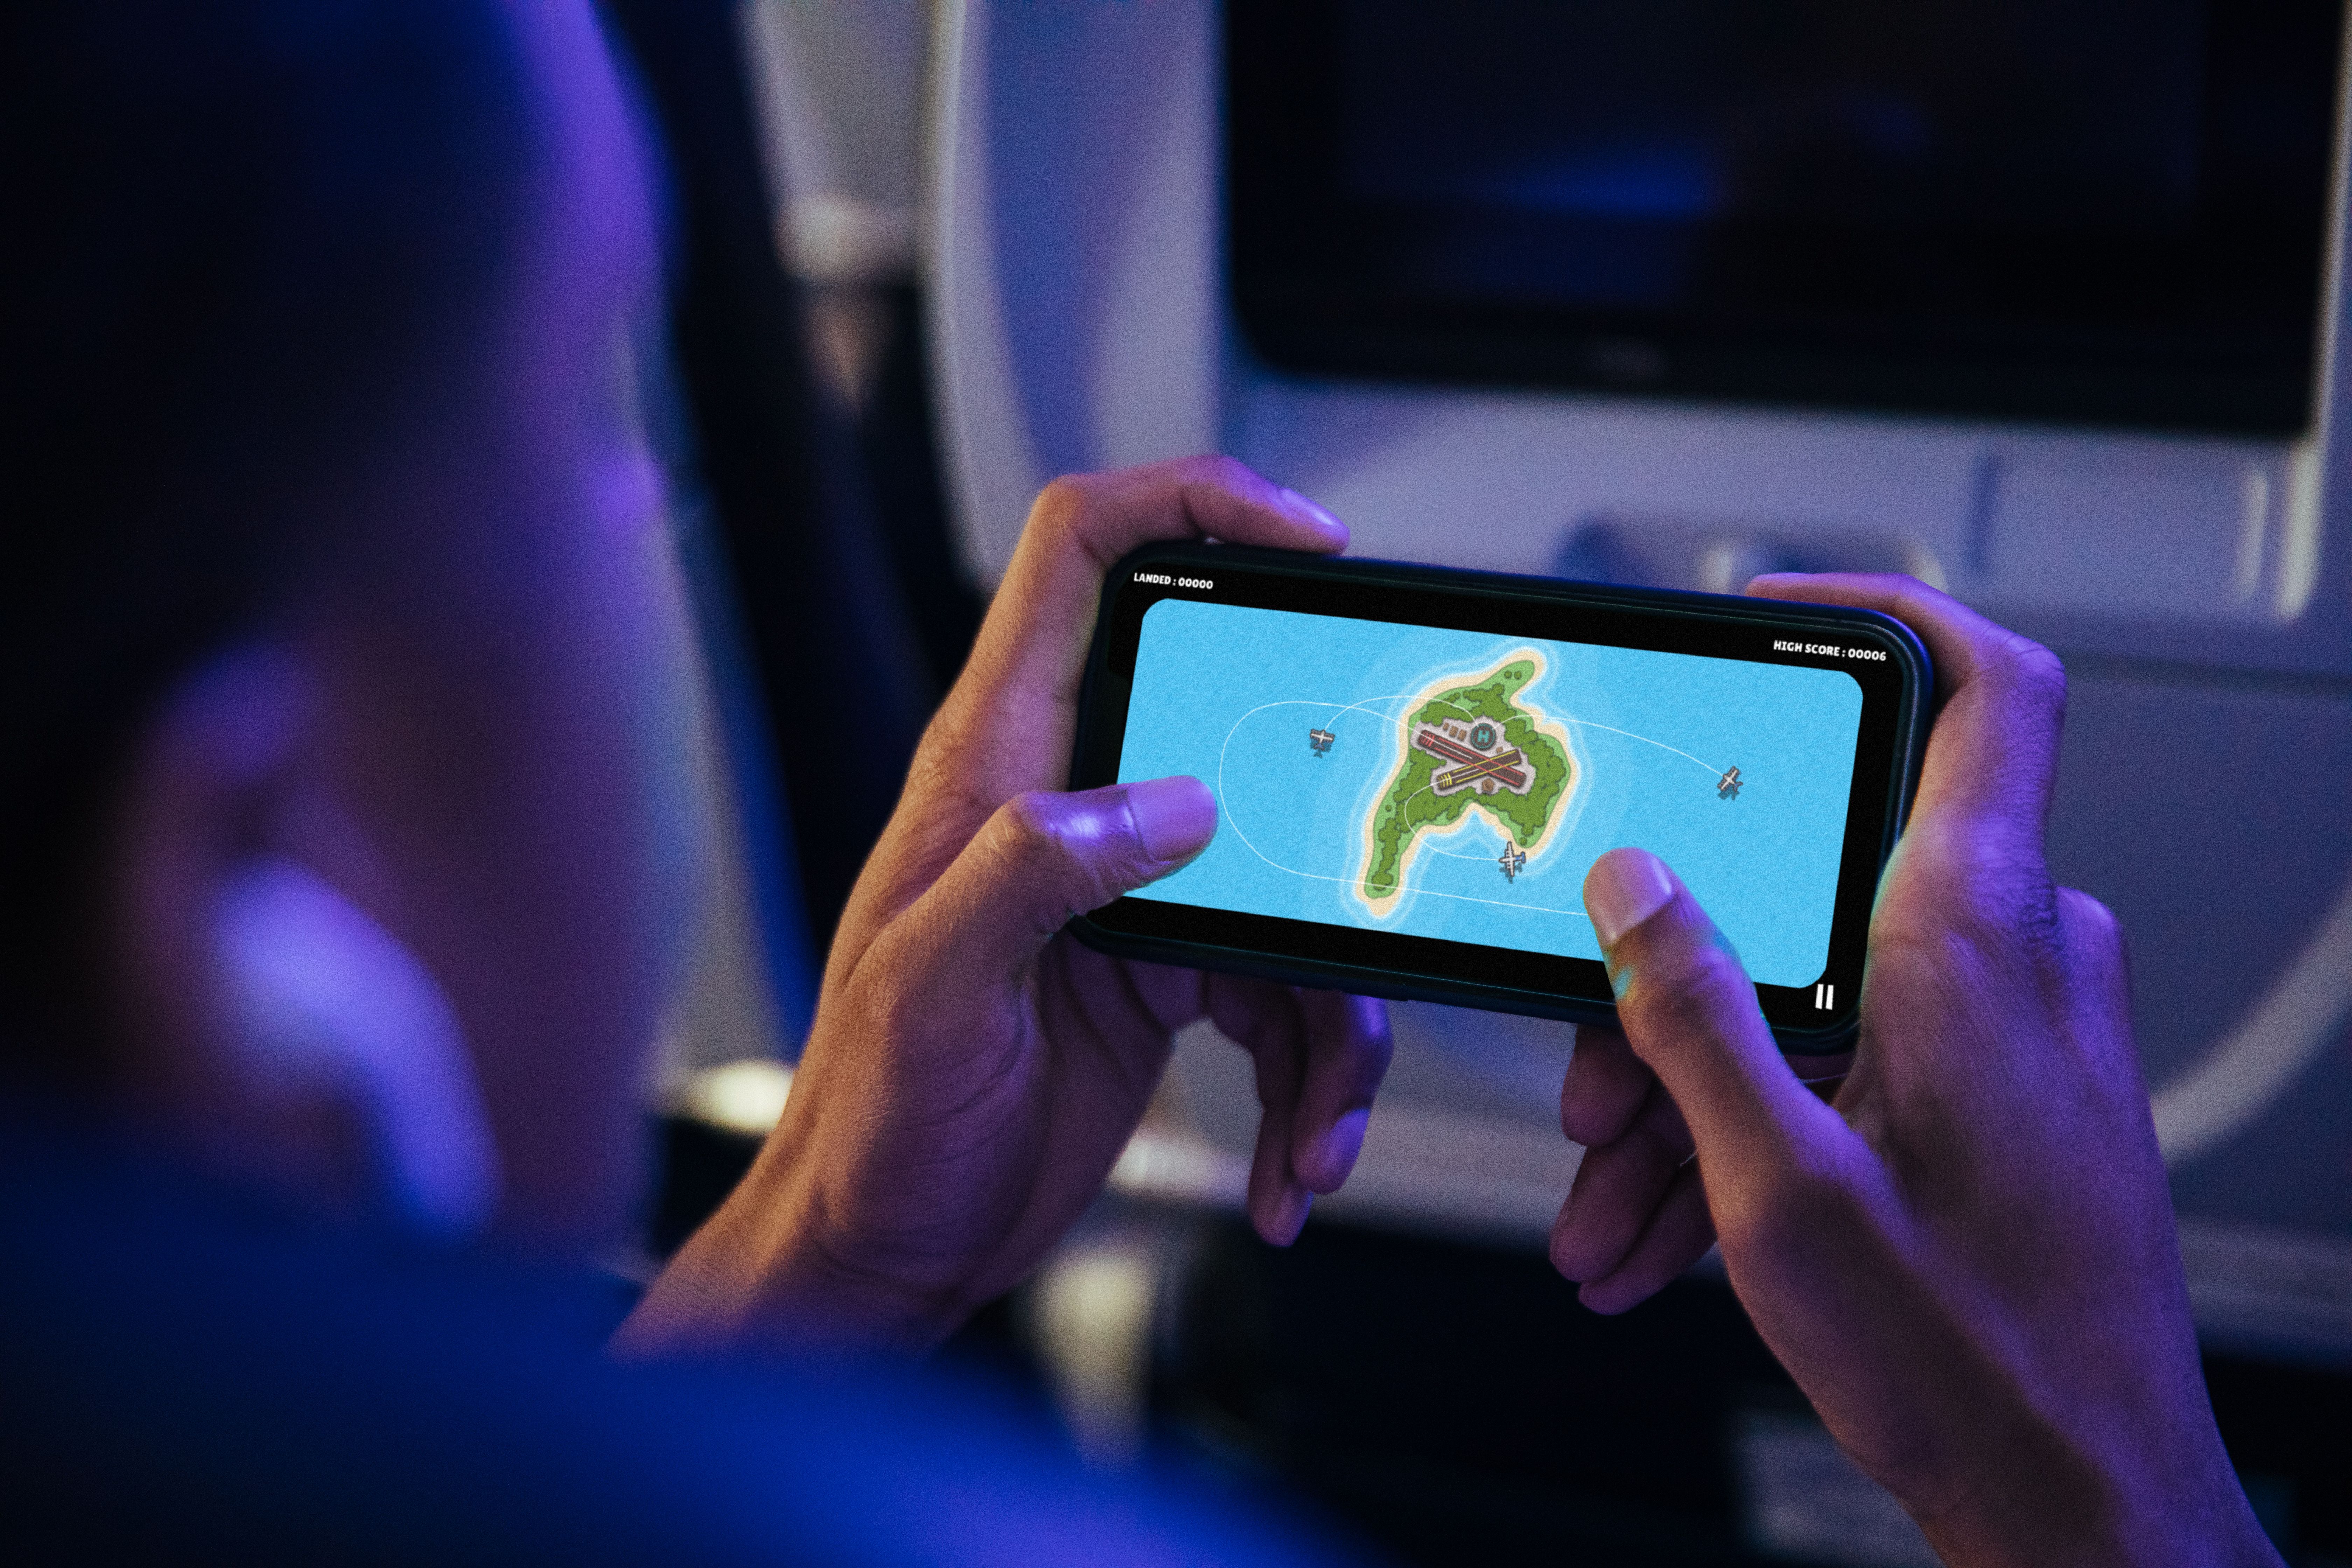 United Cleared to Land - Mobile App Game - Inflight